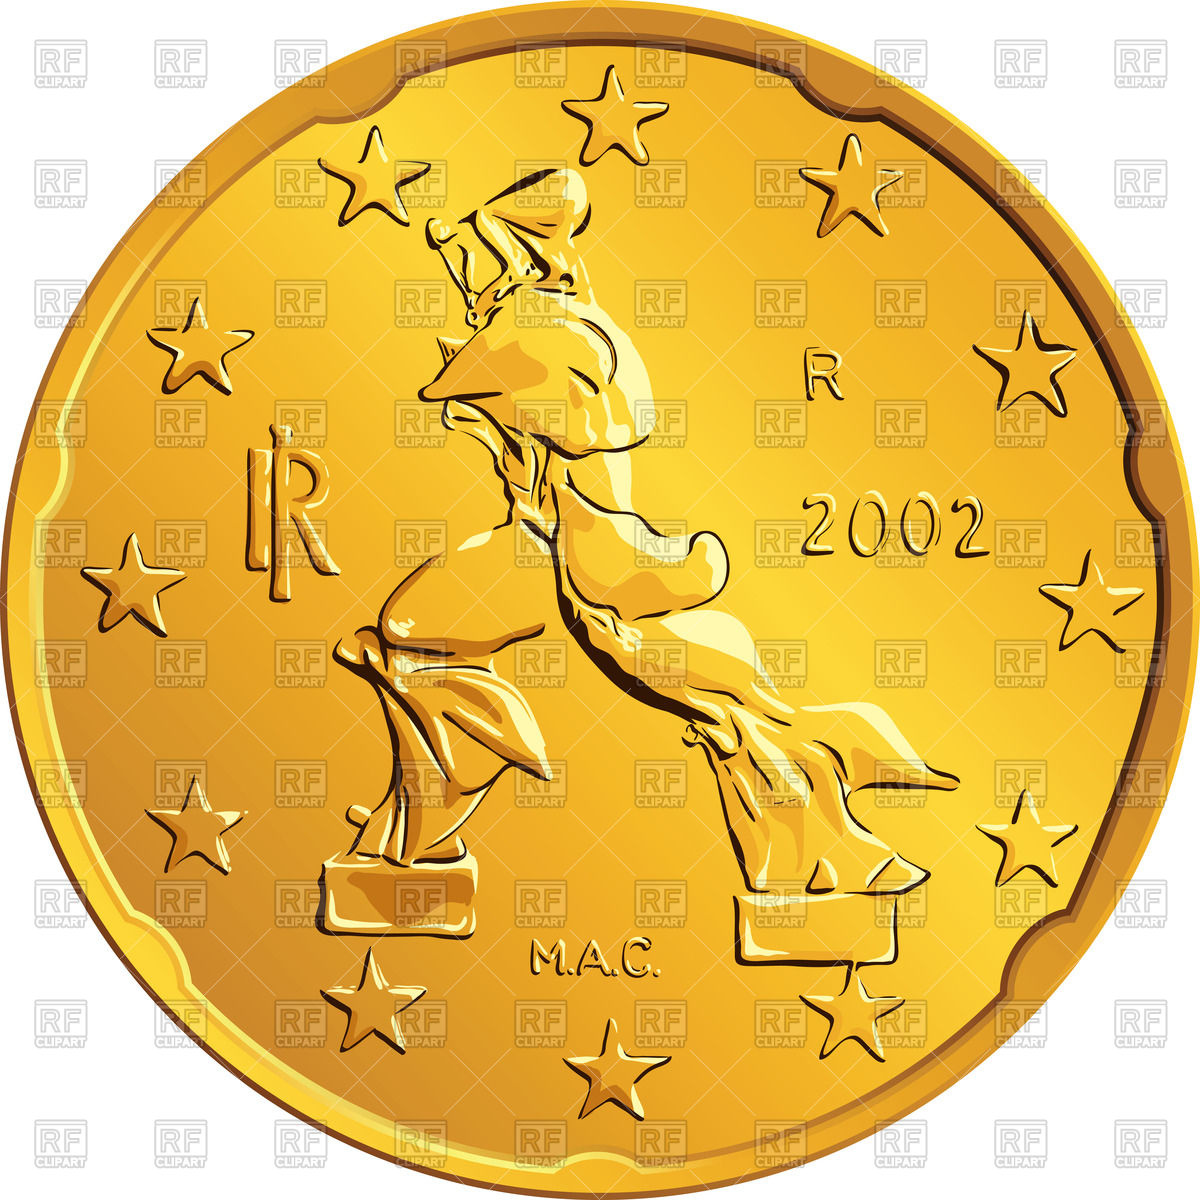 Italian Money   Gold Euro Coin With Walking Man 43523 Download